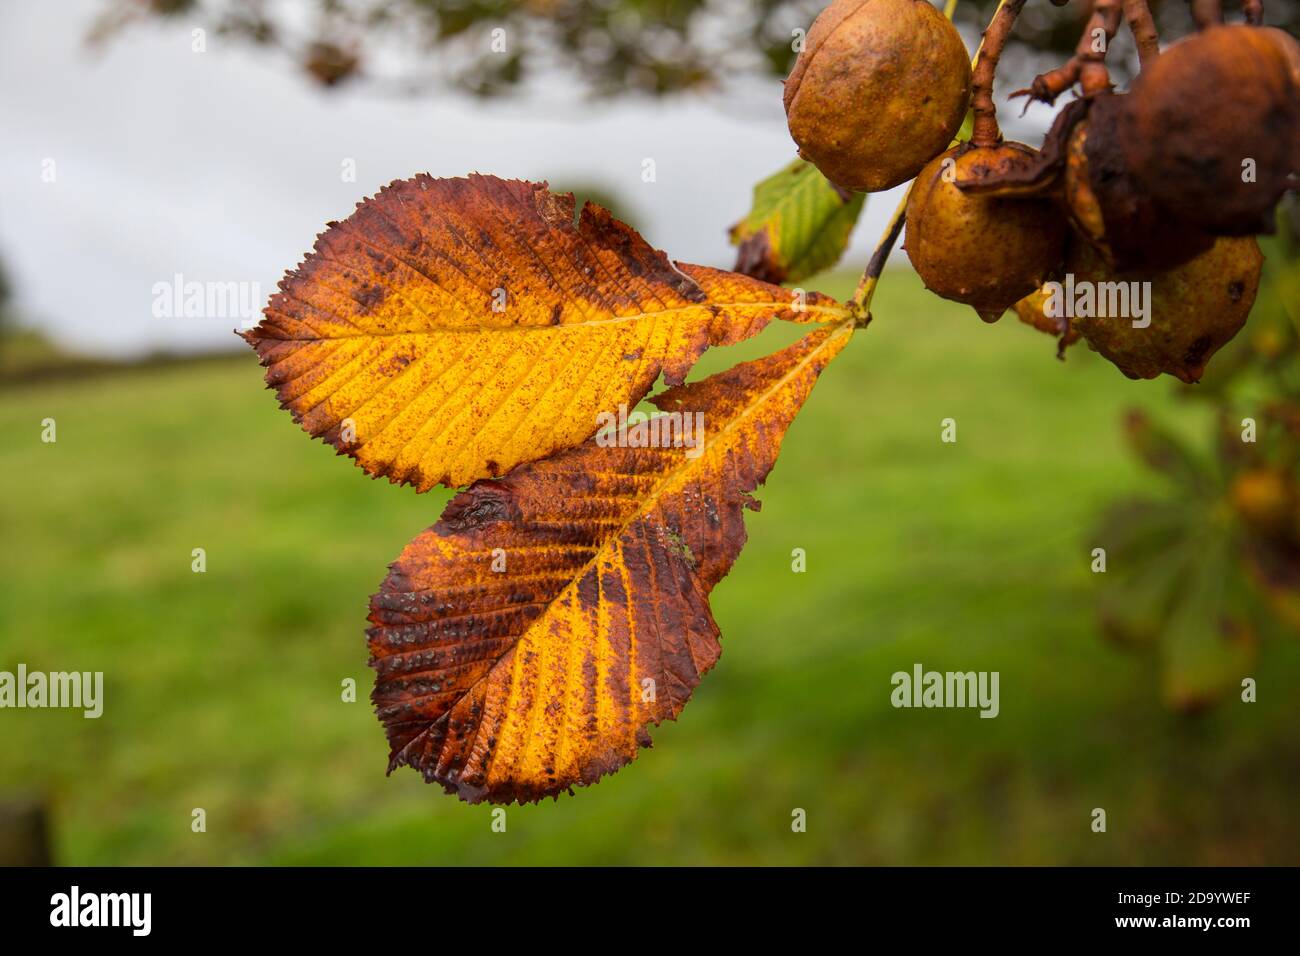 Autumn leaves from a horse chestnut tree Stock Photo